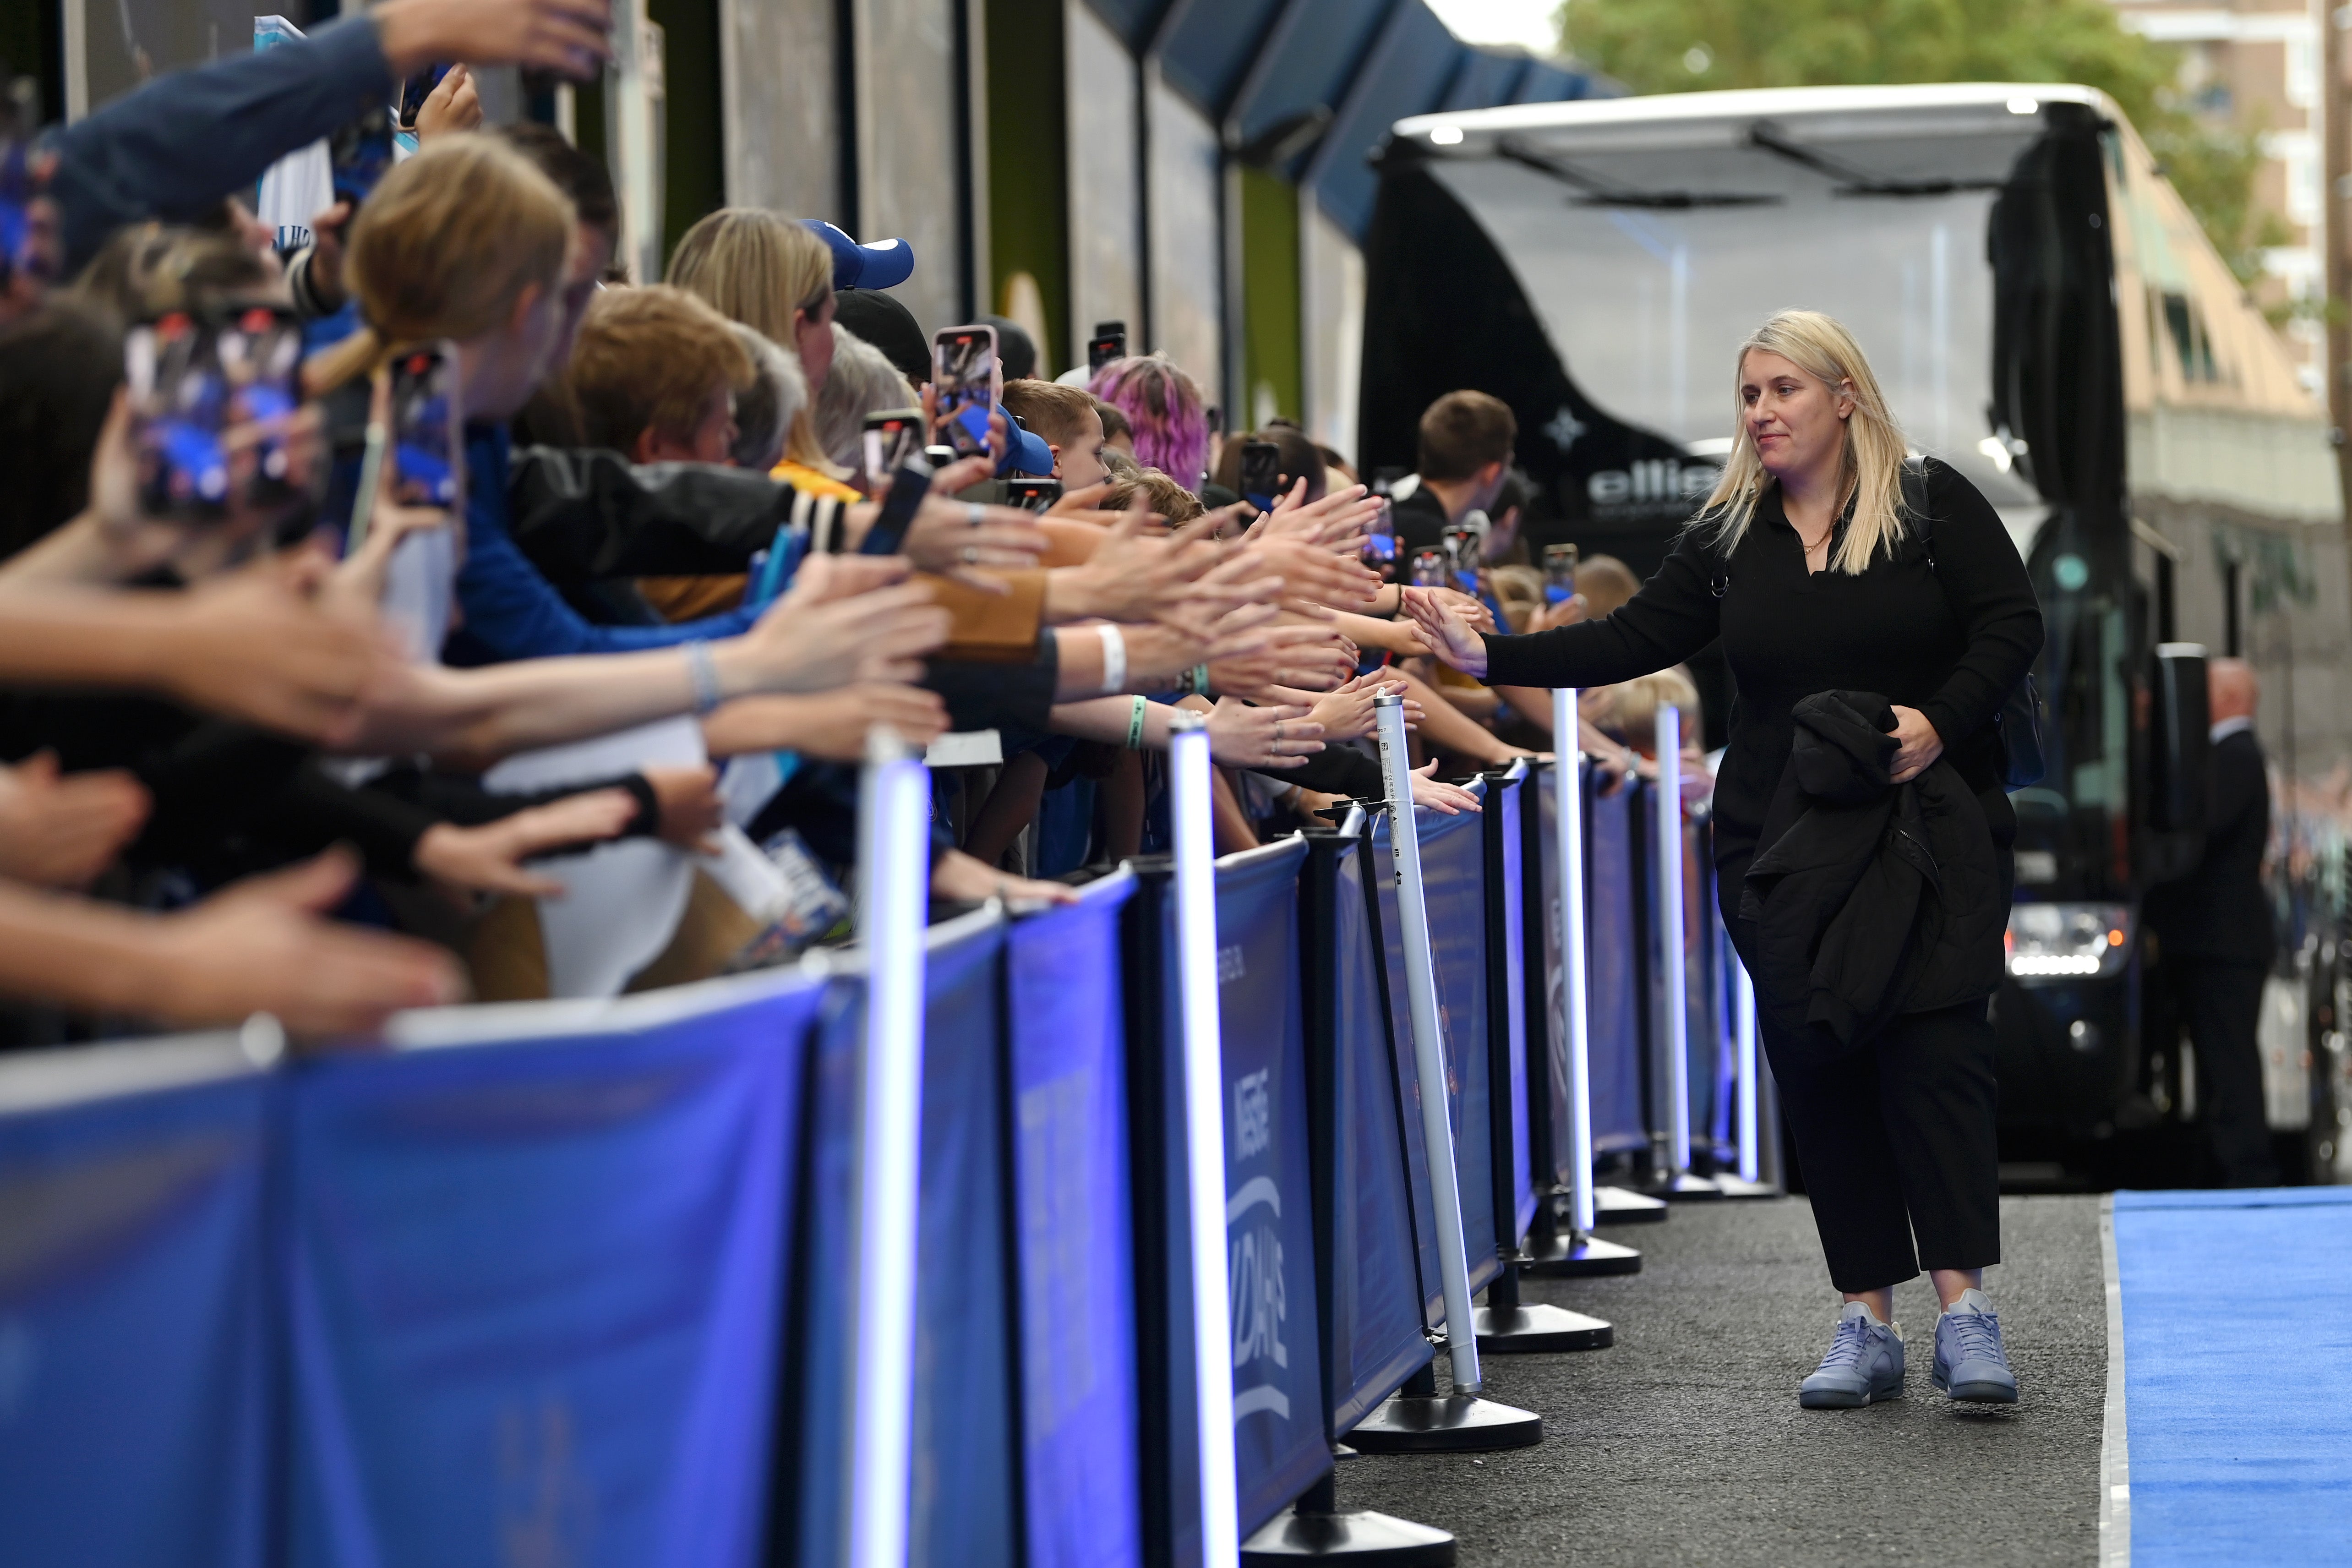 Hayes greets young fans before last month’s WSL game against Tottenham Hotspur